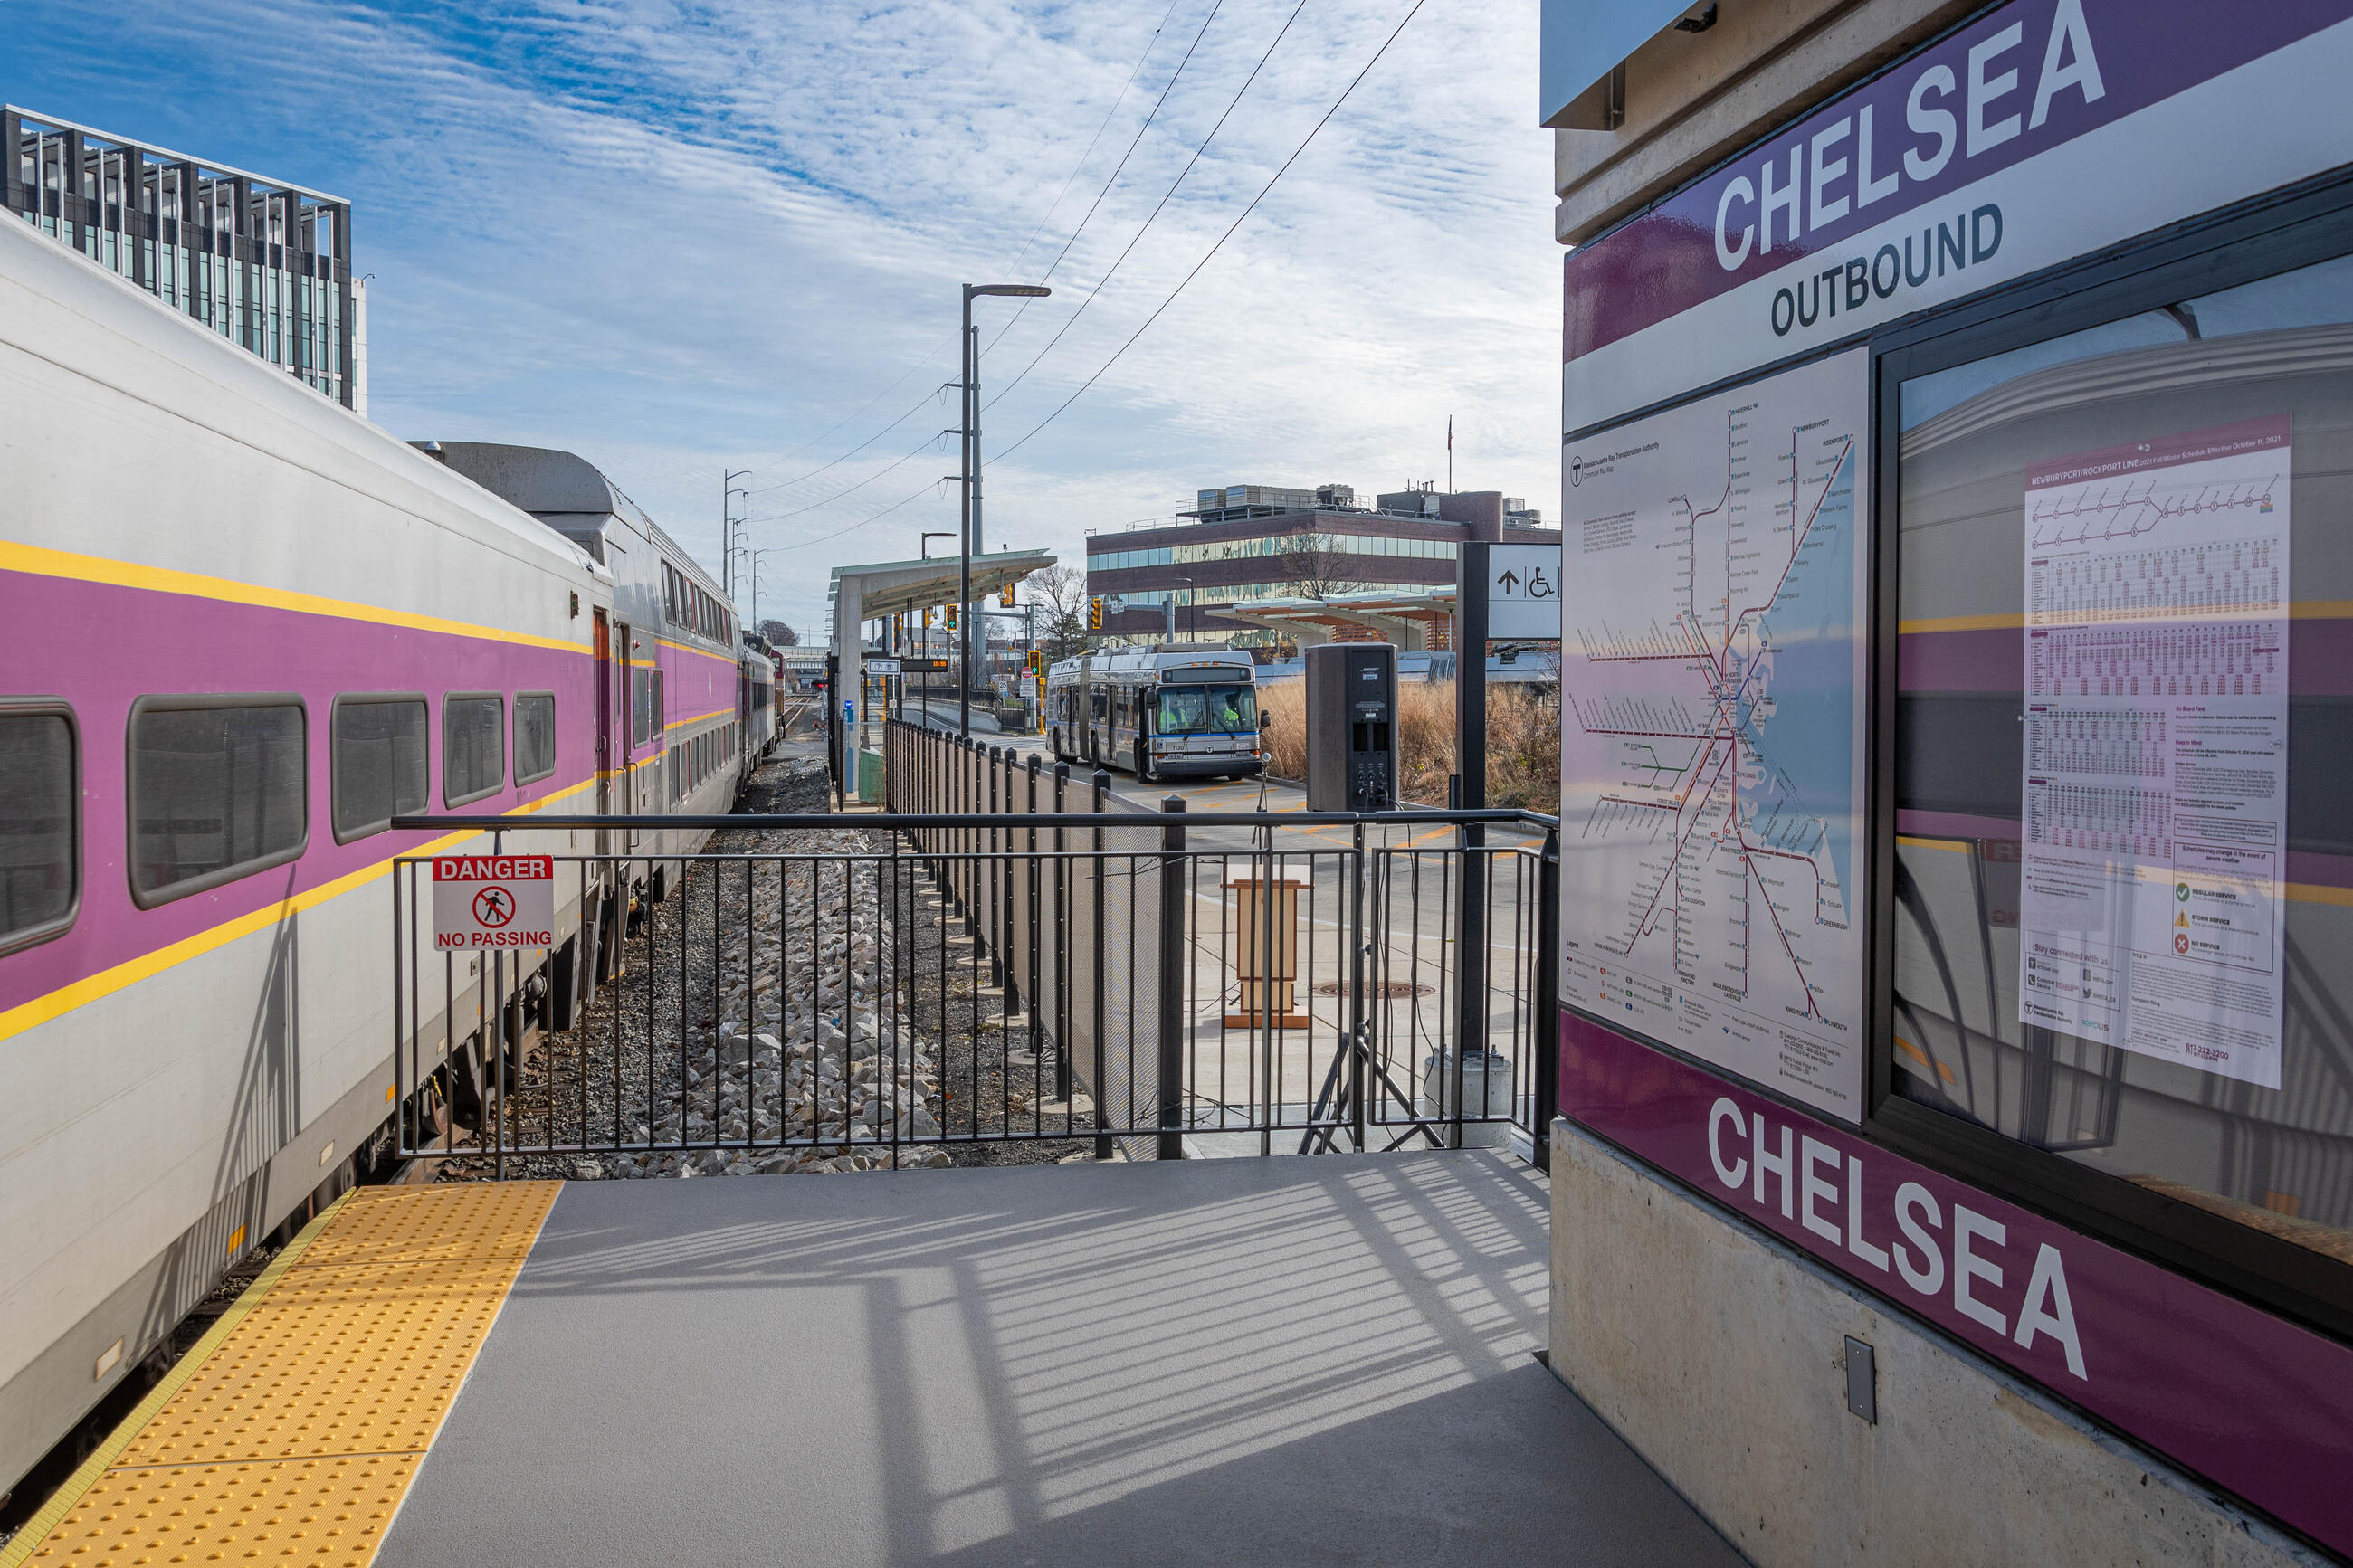 Located adjacent to the SL3 Chelsea stop, the new multimodal station is fully accessible and features high-level platforms, canopies and benches, new sidewalks, and more.